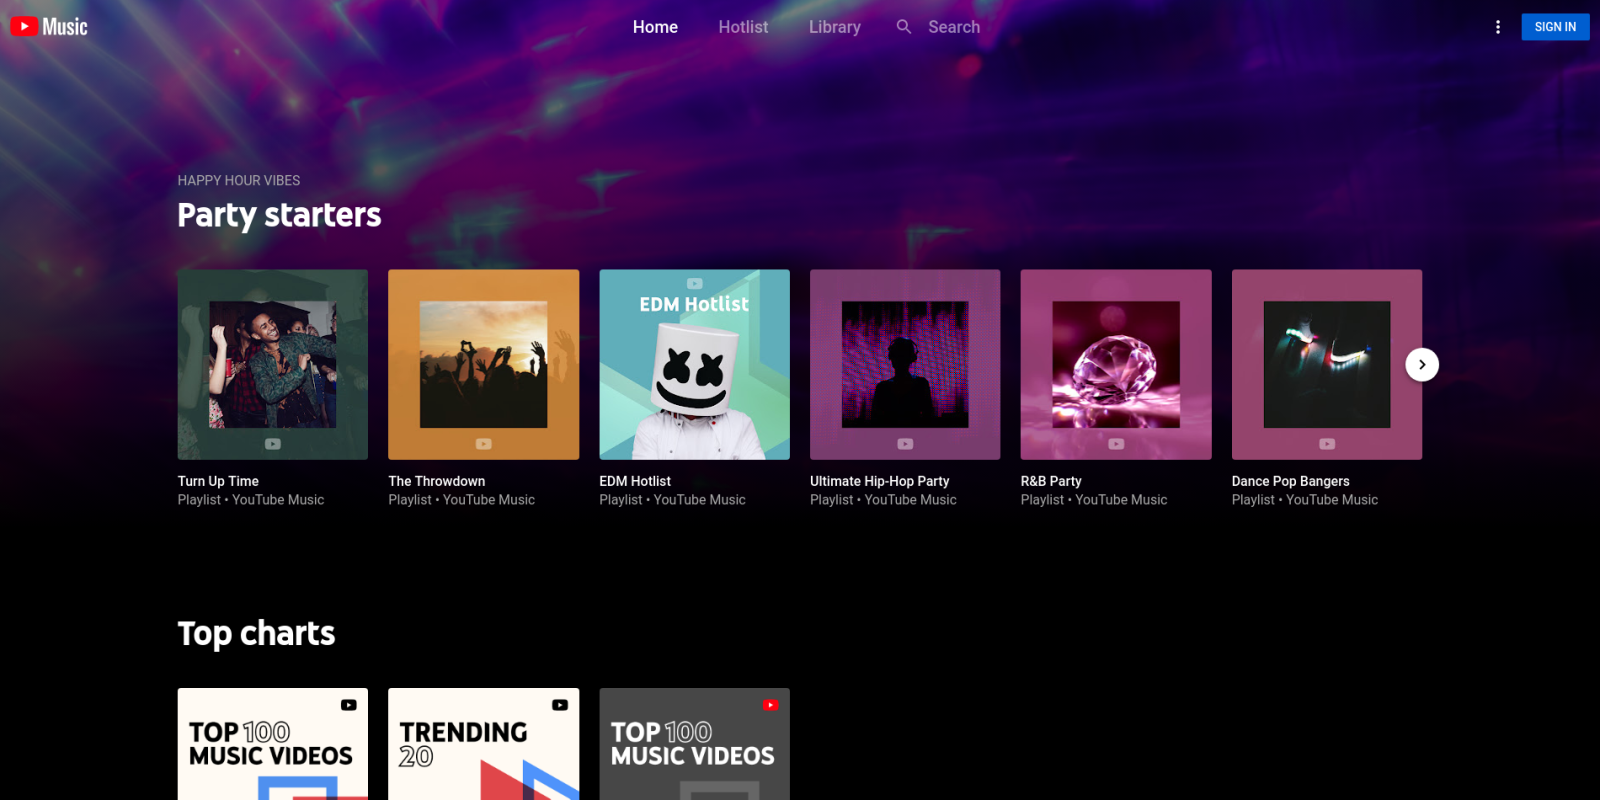 The YouTube Music home screen displaying the "Party starters" backdrop.